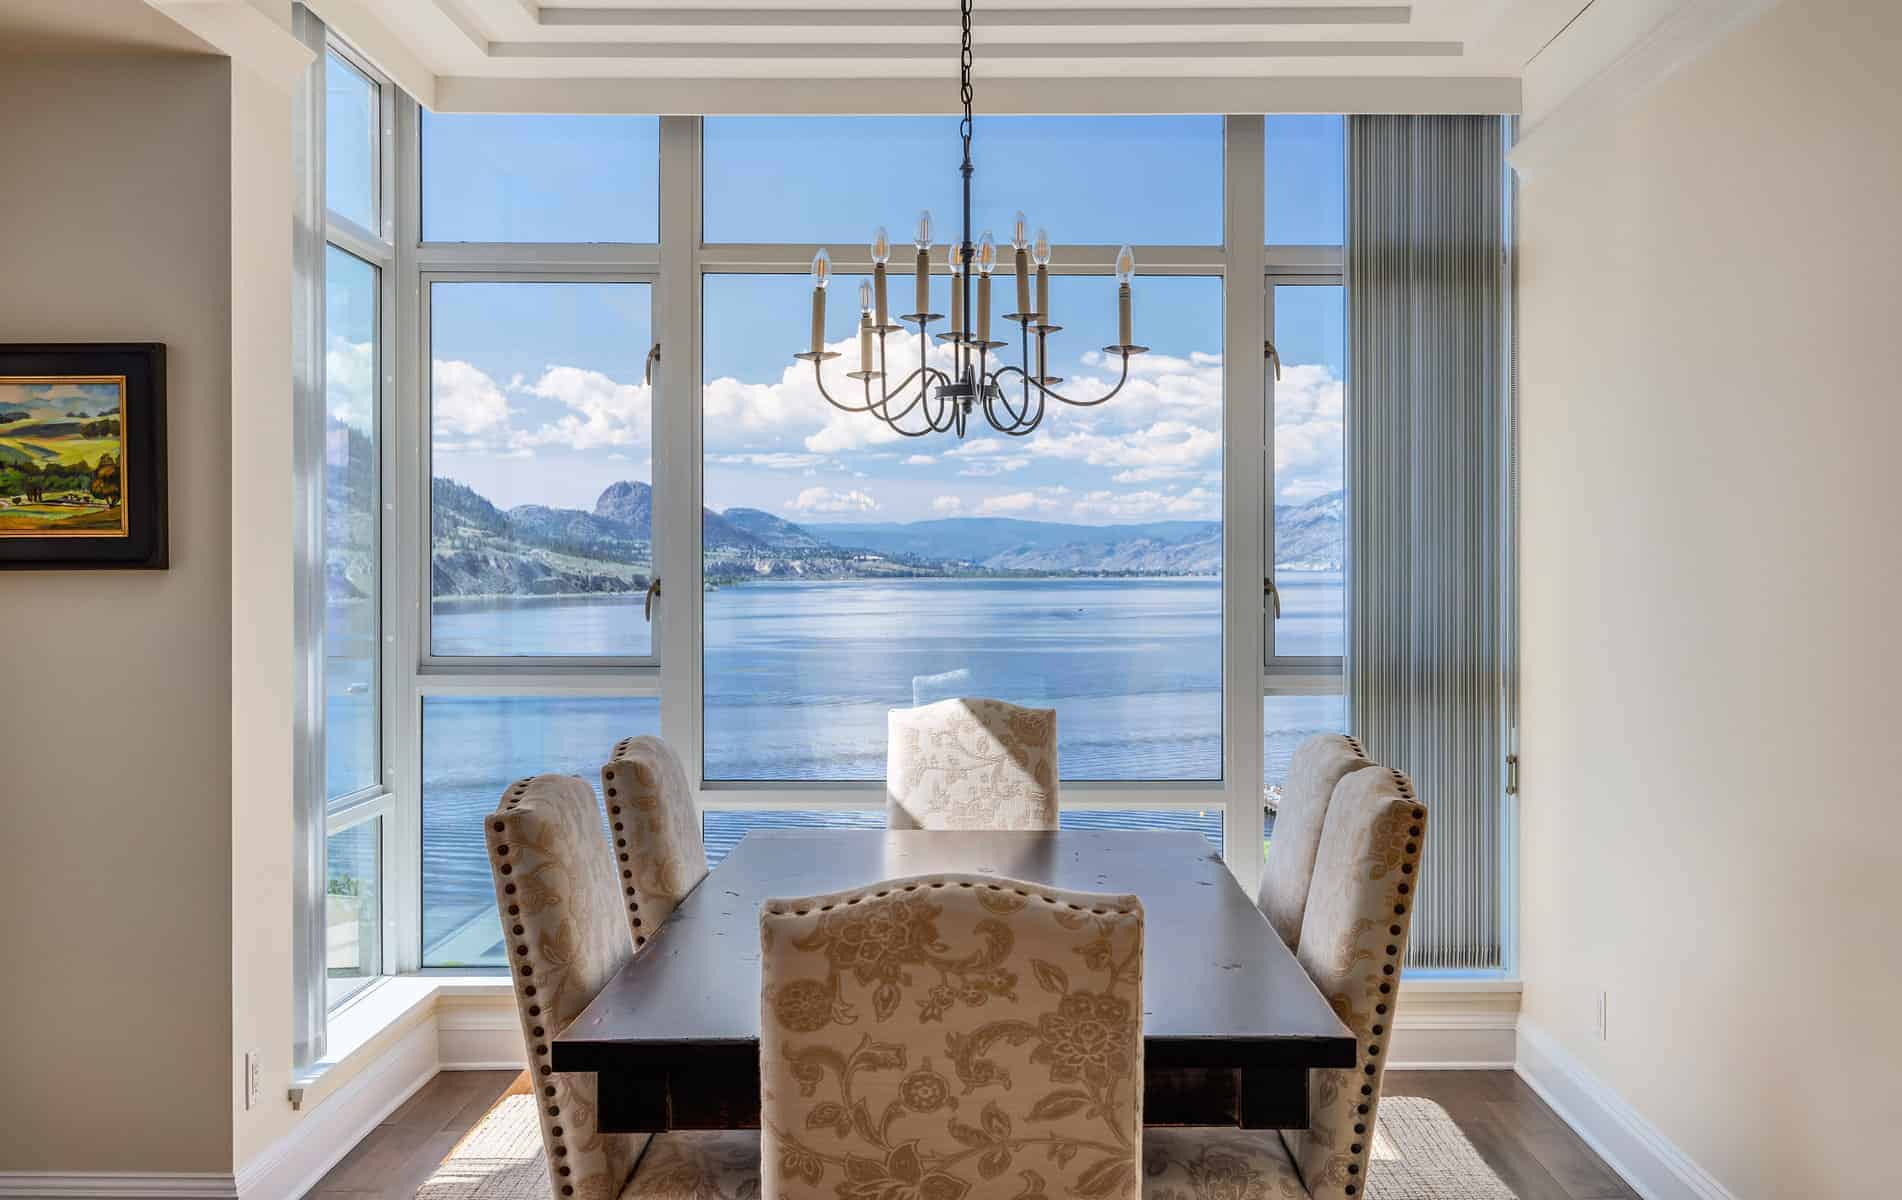 Formal dining room with a dark brown wooden table and upholstered white printed chairs with tall glass windows overlooking the ocean